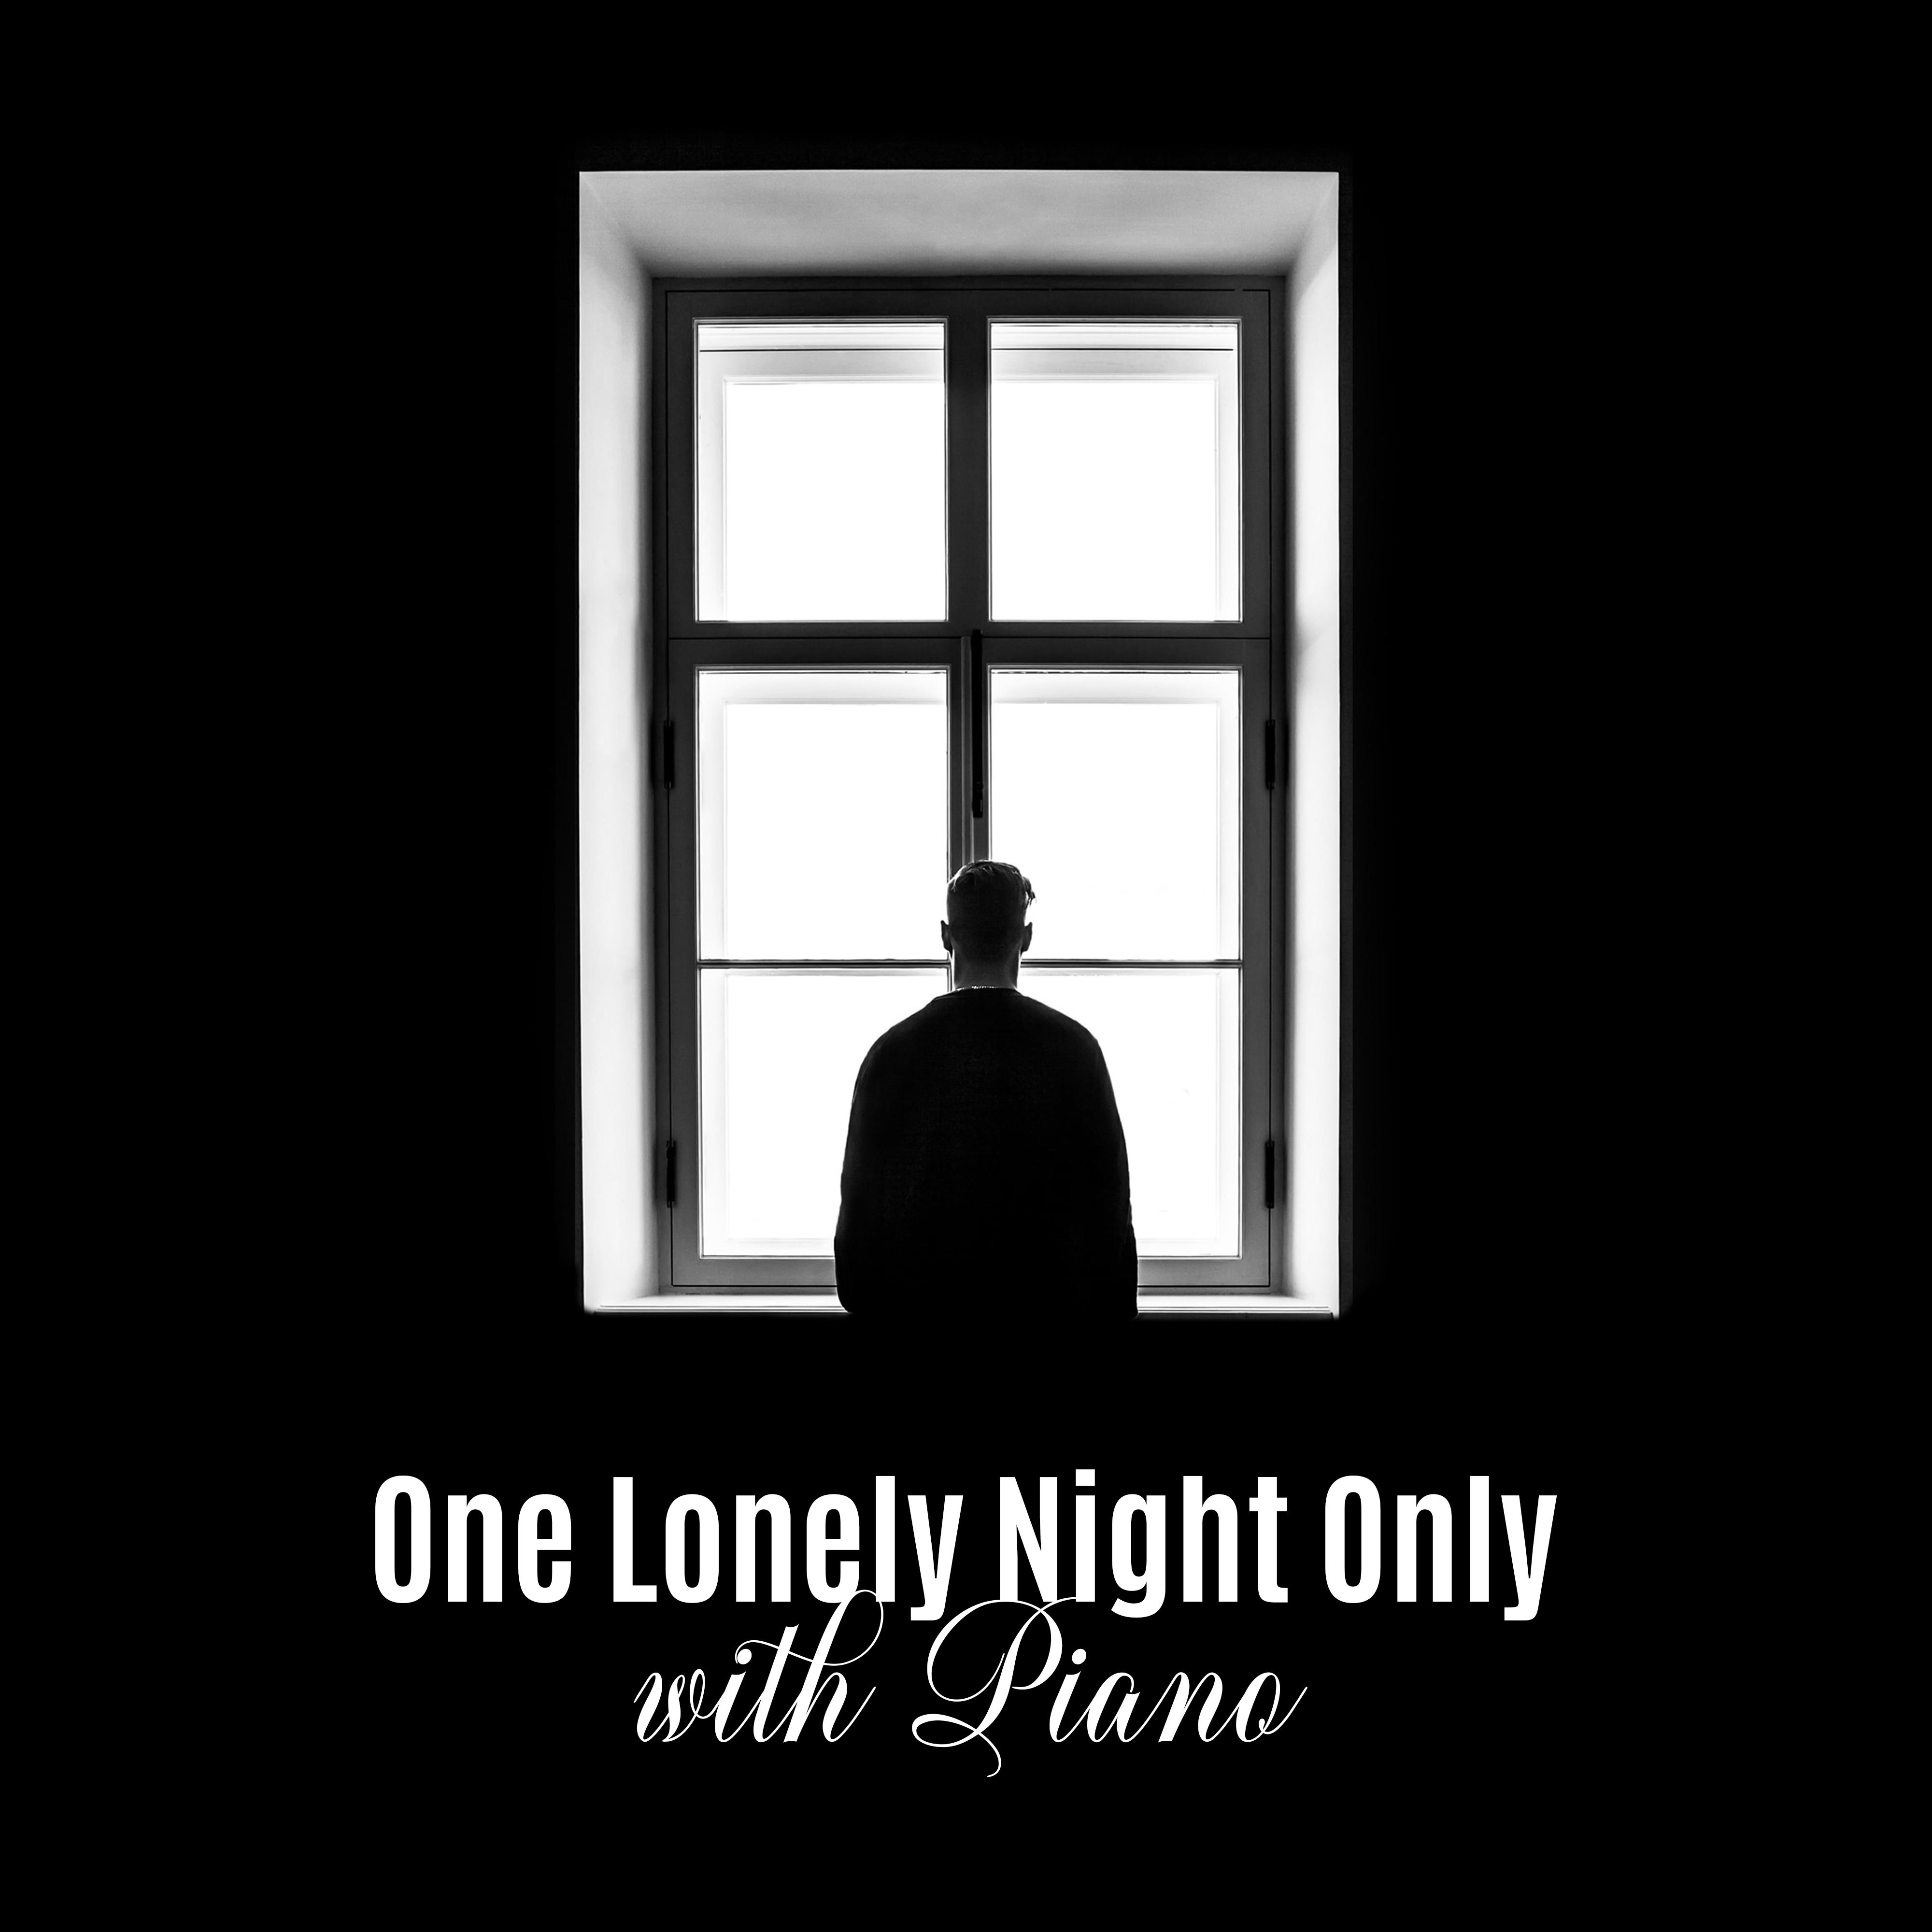 One Lonely Night Only with Piano: 2019 Most Nostalgic Piano Jazz Music for Sad Moments in Your Life, Couple' s Quiet Time, Longing for Someone Important to You